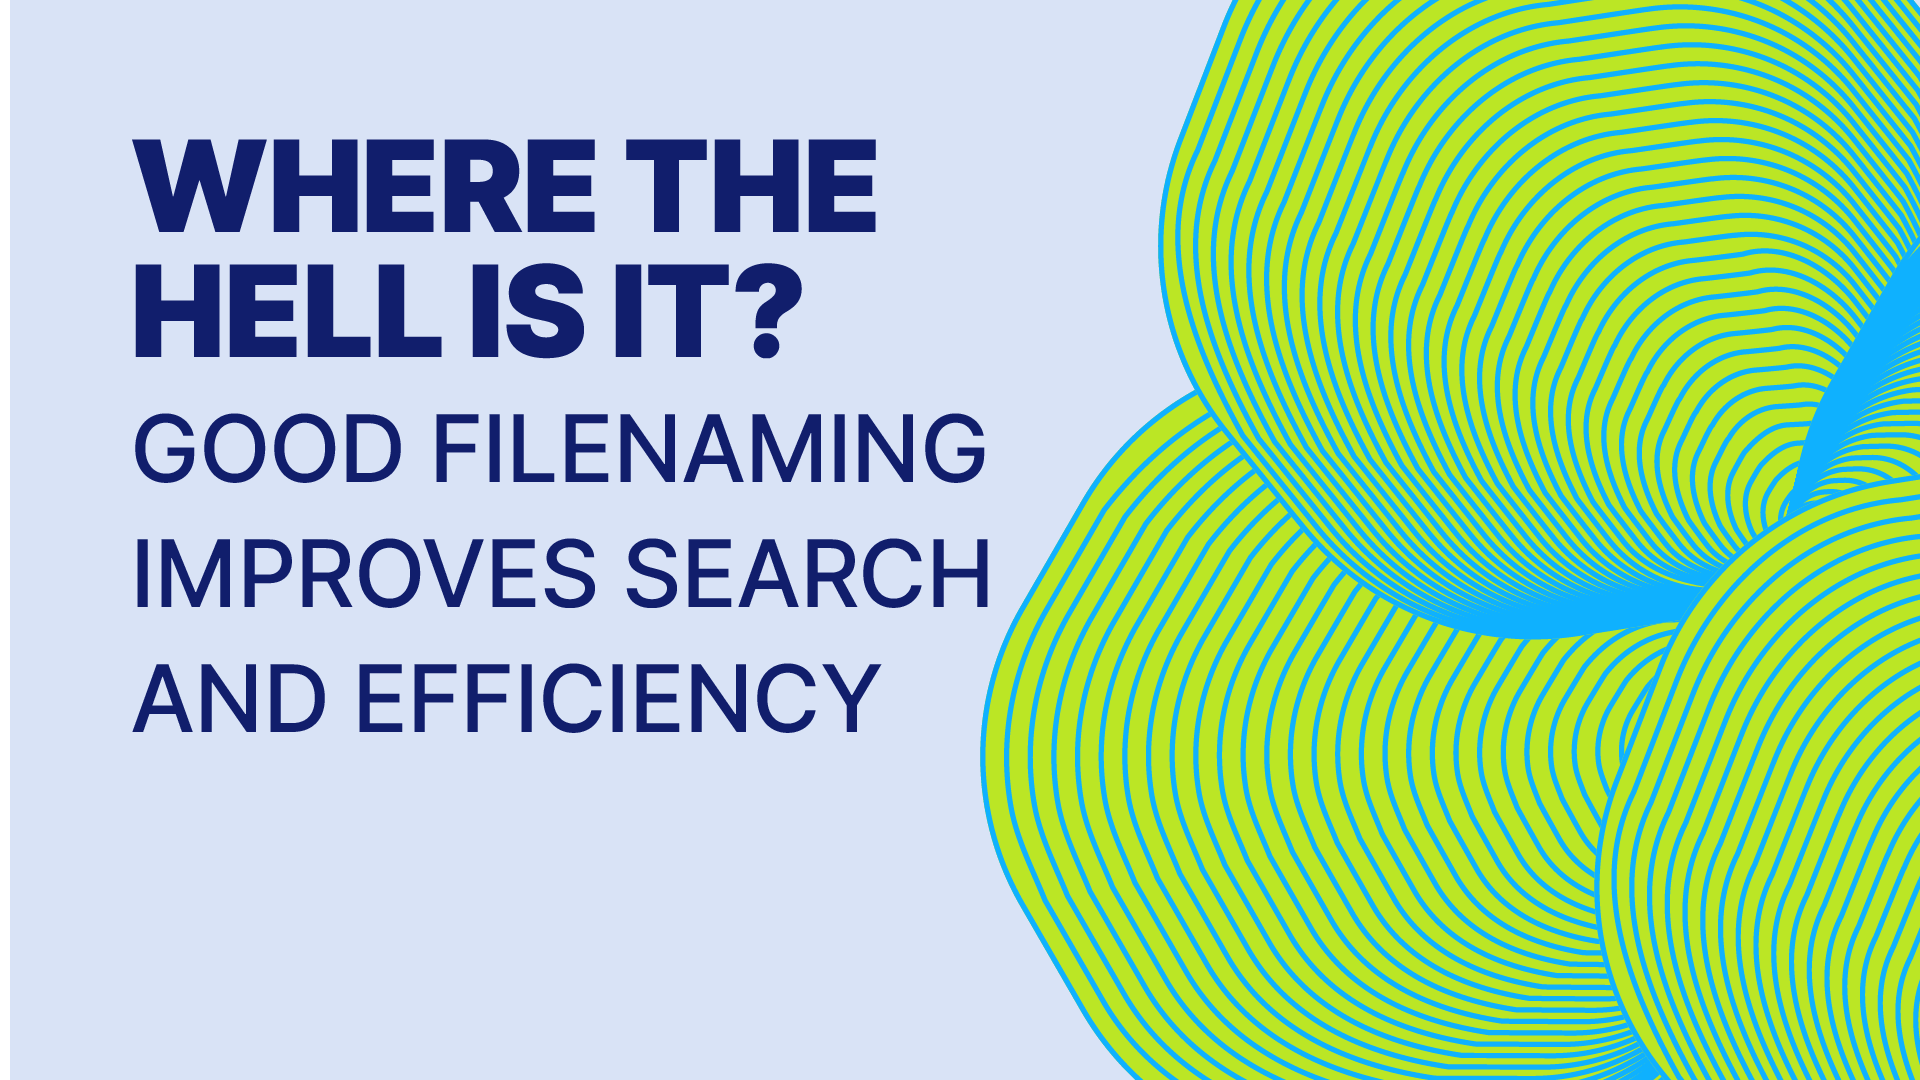 “Where is it?” Good filenaming improves search and efficiency